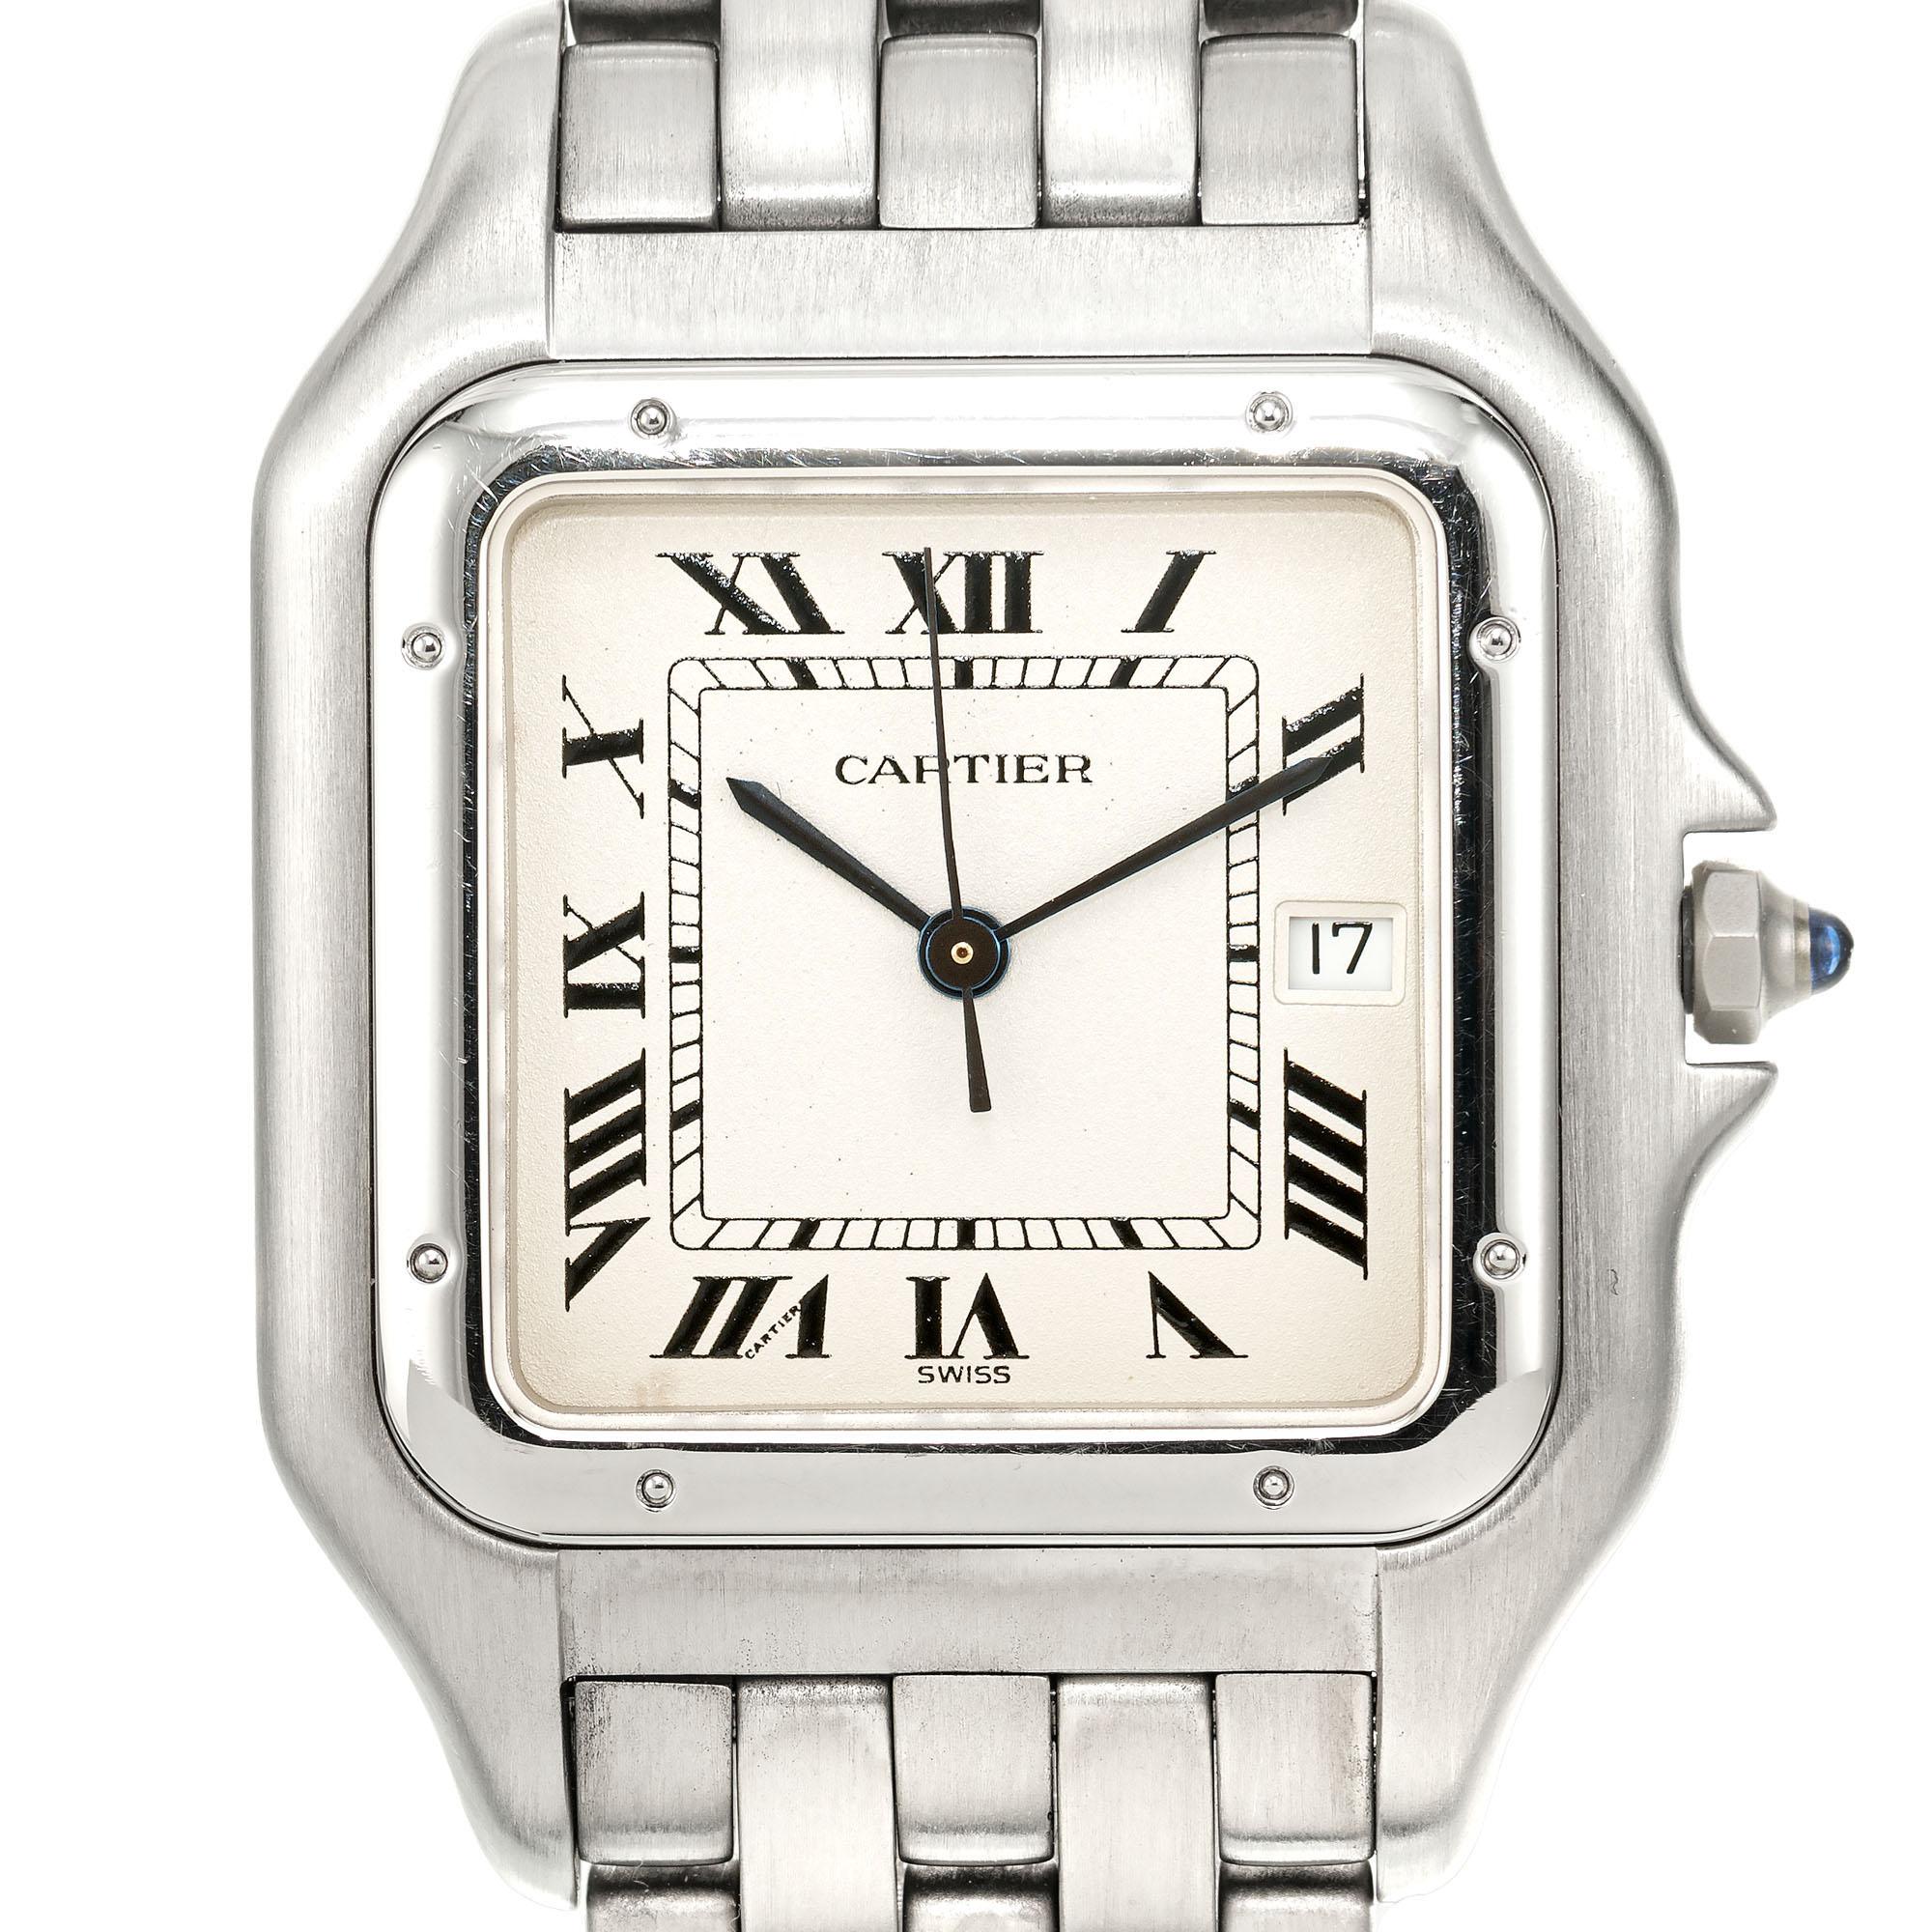 Classic mens Cartier Panthere Steel watch. Roman numeral parchment color dial. Deployment buckle. 7 1/8 Inches. 

Length: 39.77mm
Width: 30mm
Band width at case: 16.45mm
Case thickness: 6.11mm
Band: Stainless Steel
Crystal: sapphire
Dial: parchment